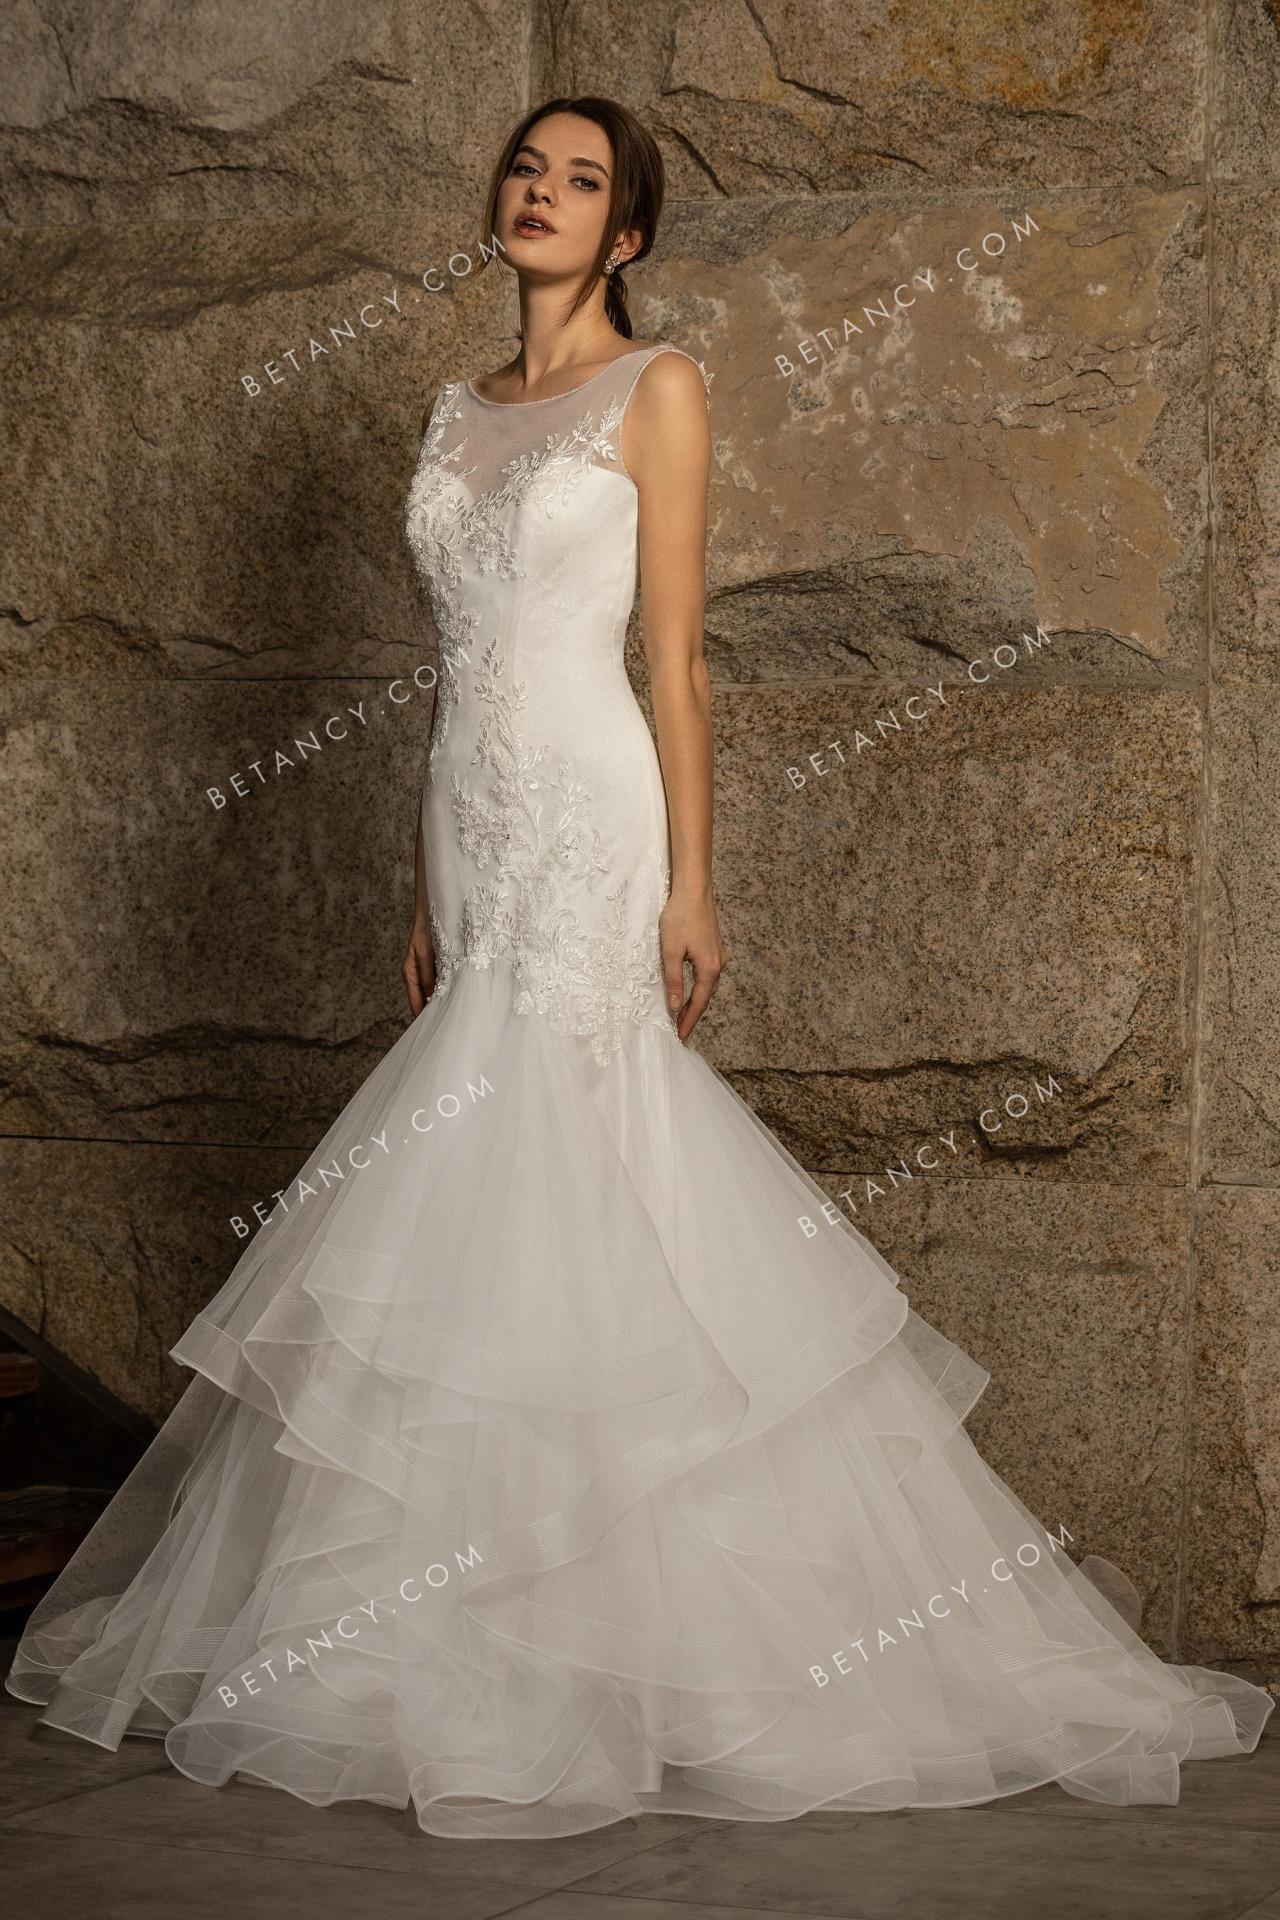 Illusion neck top with floral beaded applique bridal gown 2